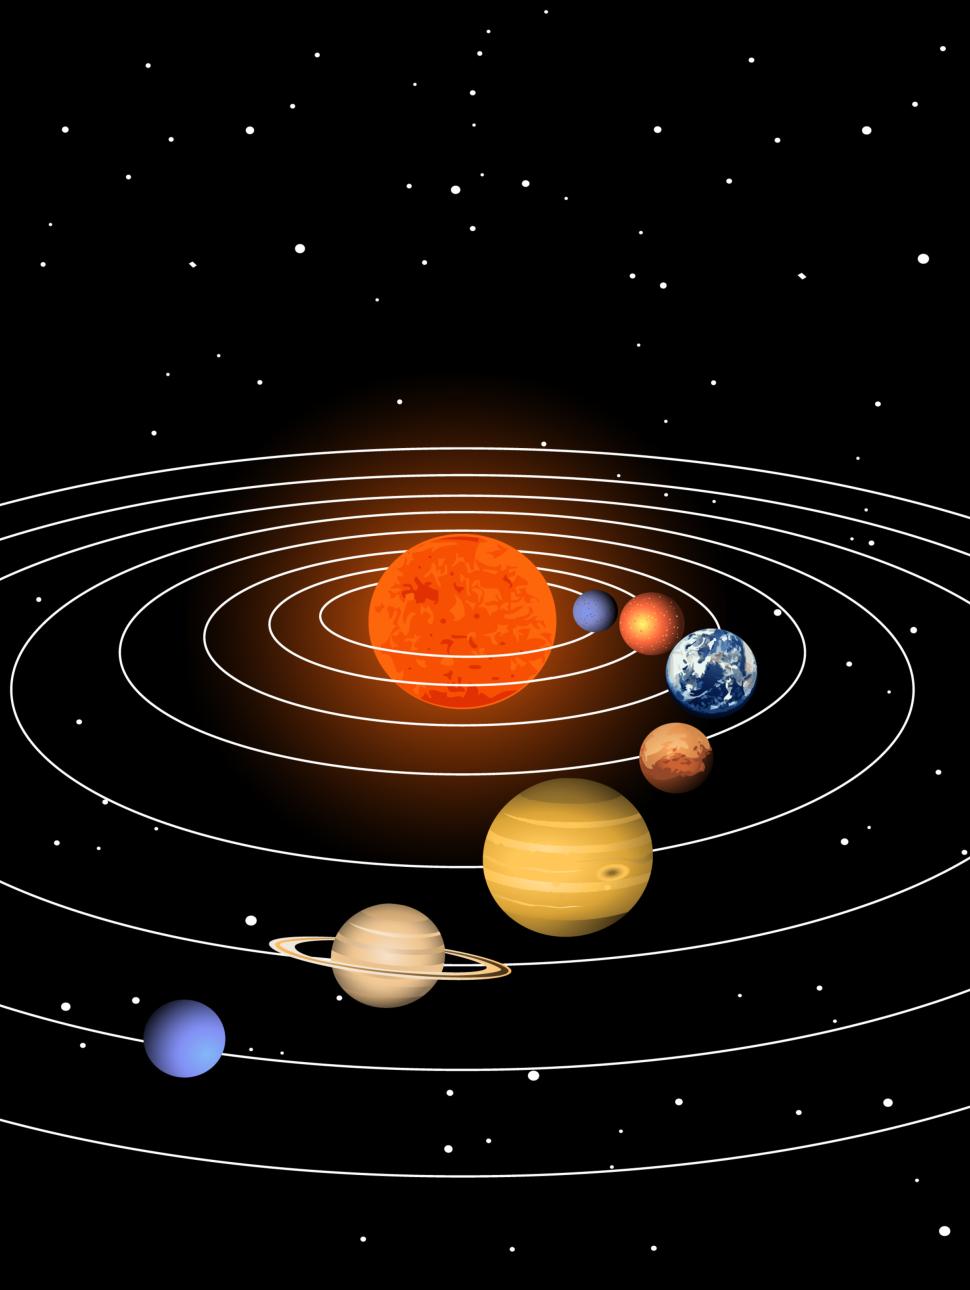 An illustration of the solar system against a black background